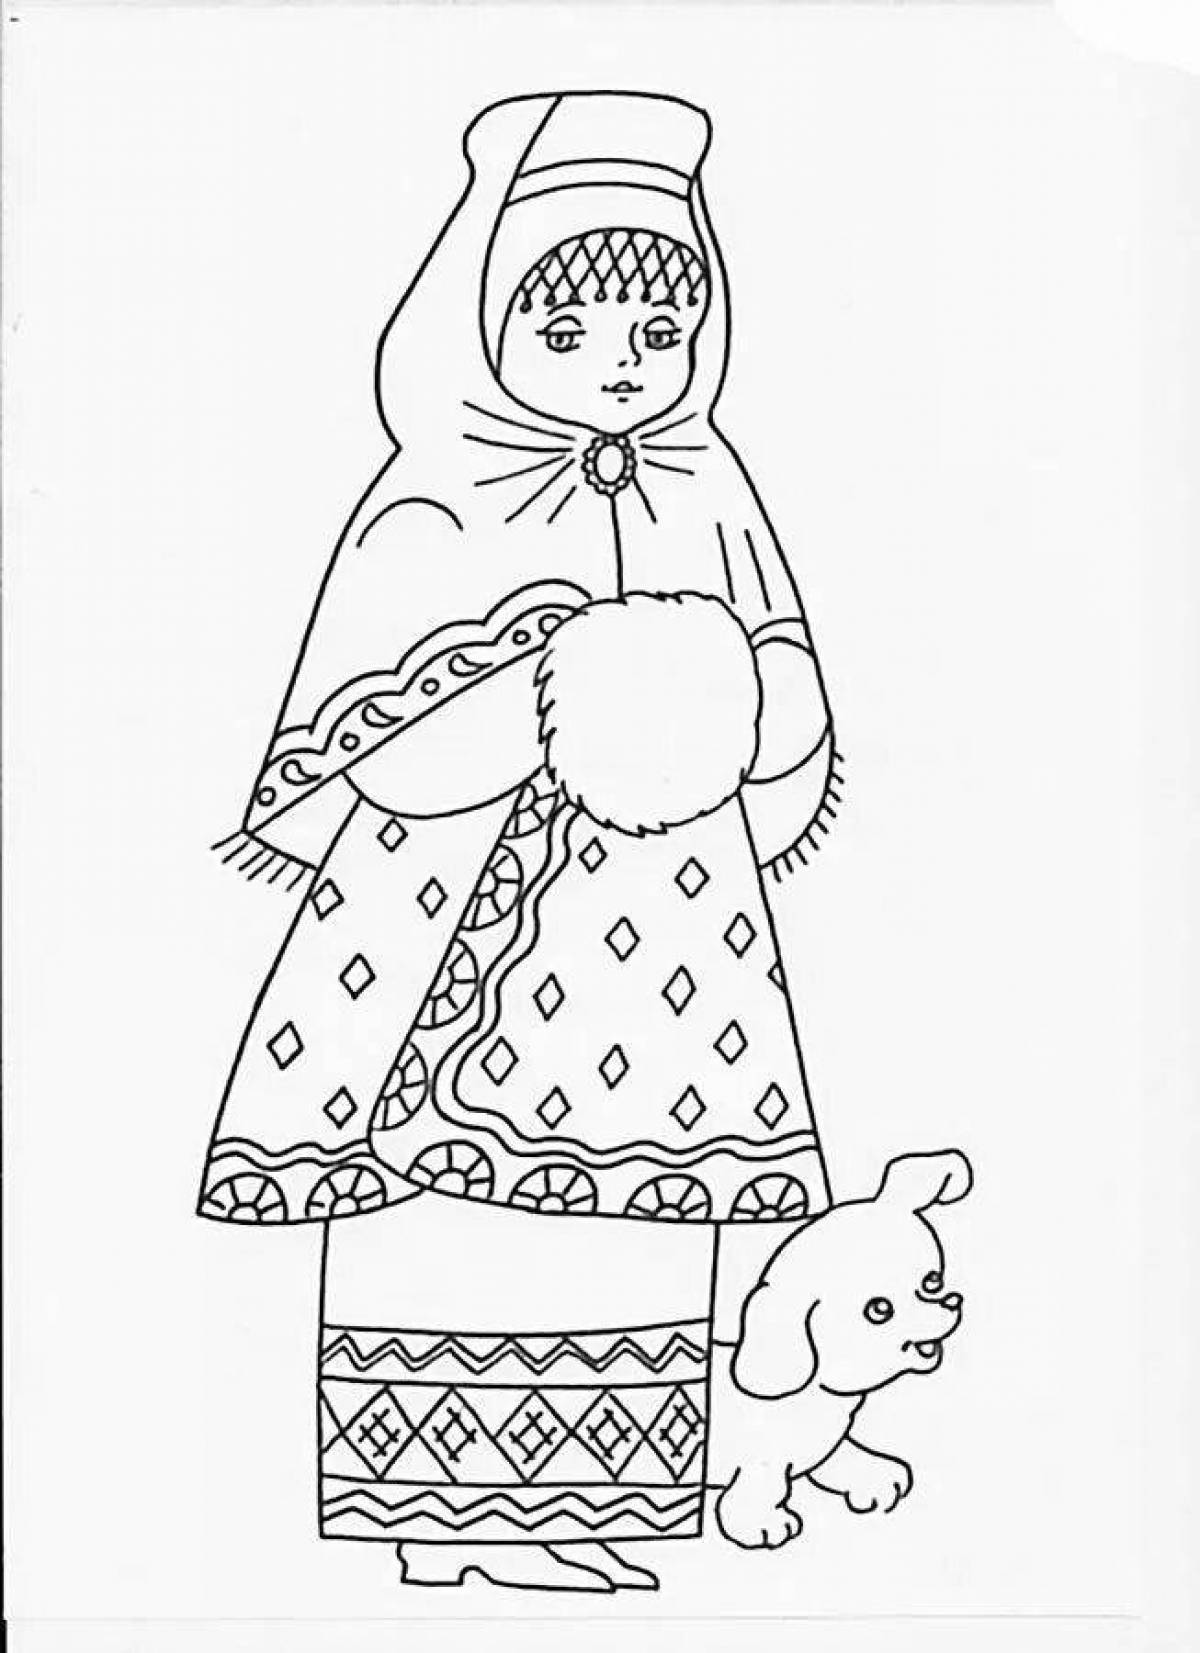 Colorful Russian folk costume coloring page for kids